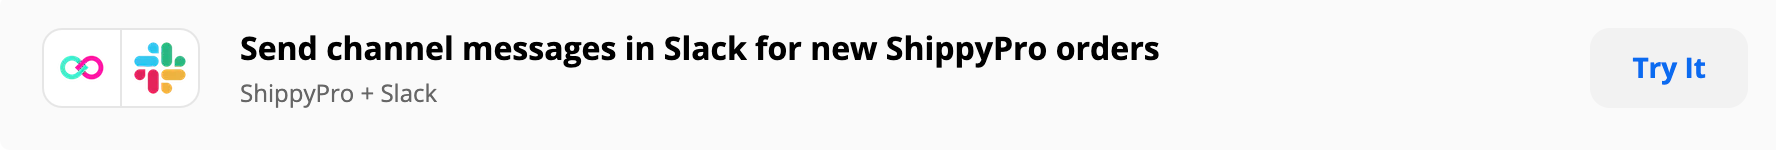 Send channel messages in Slack for new ShippyPro Orders